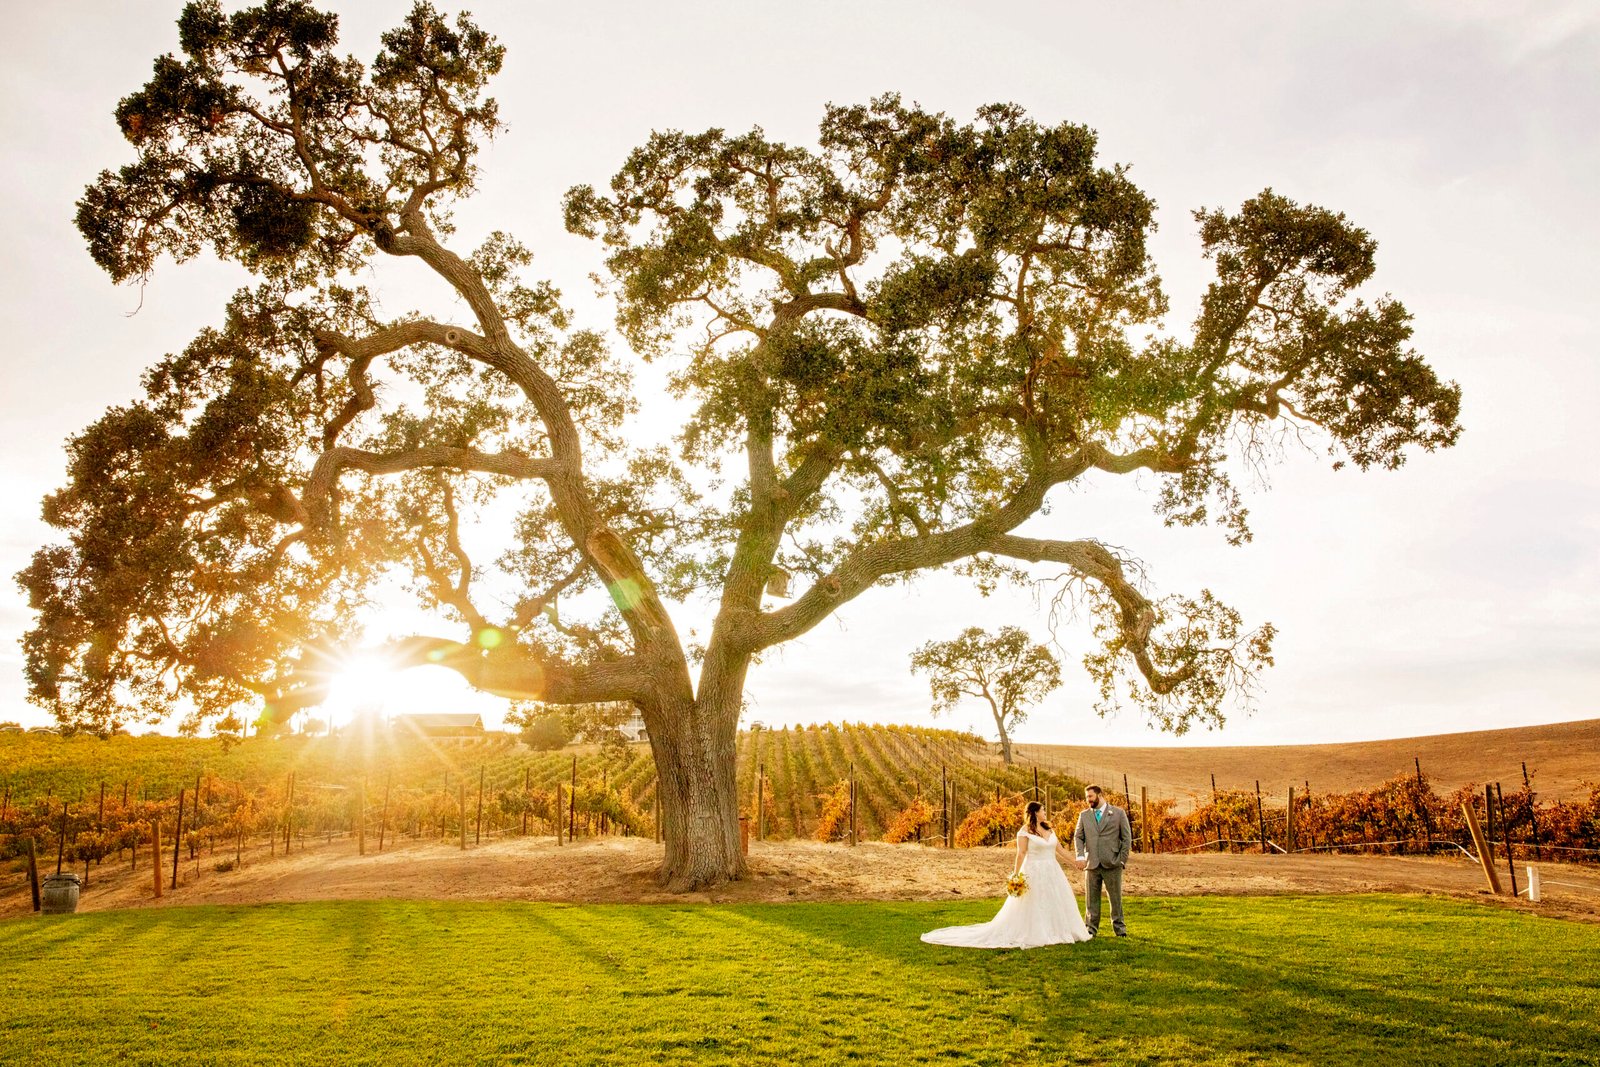 bride and groom holding hands on the grass under a large oak tree in front of a vineyard